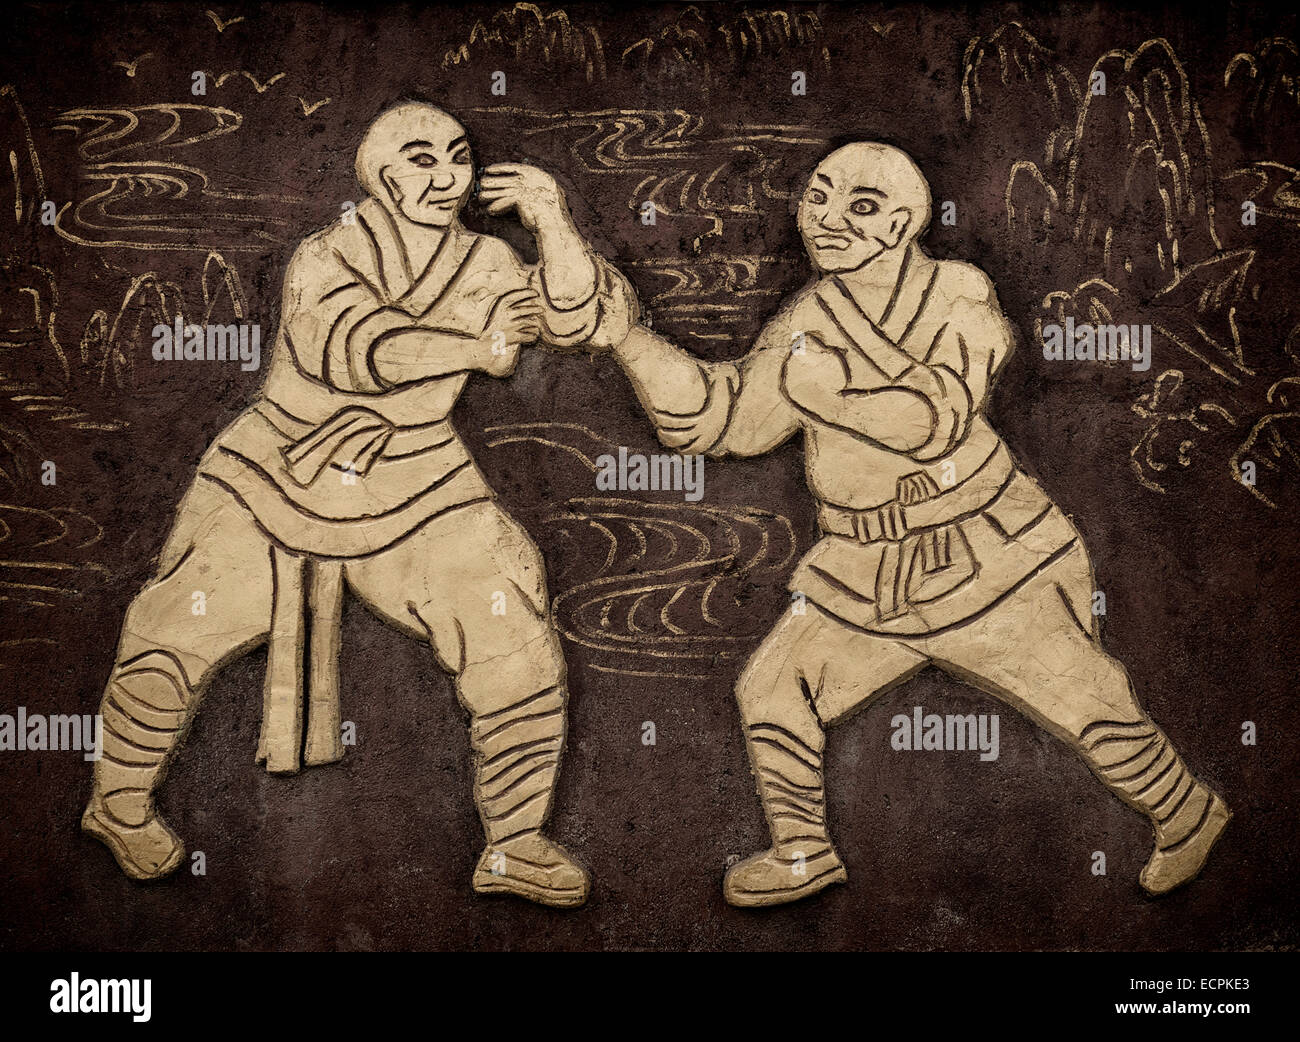 The Ancient Martial Art of Crom-Fu